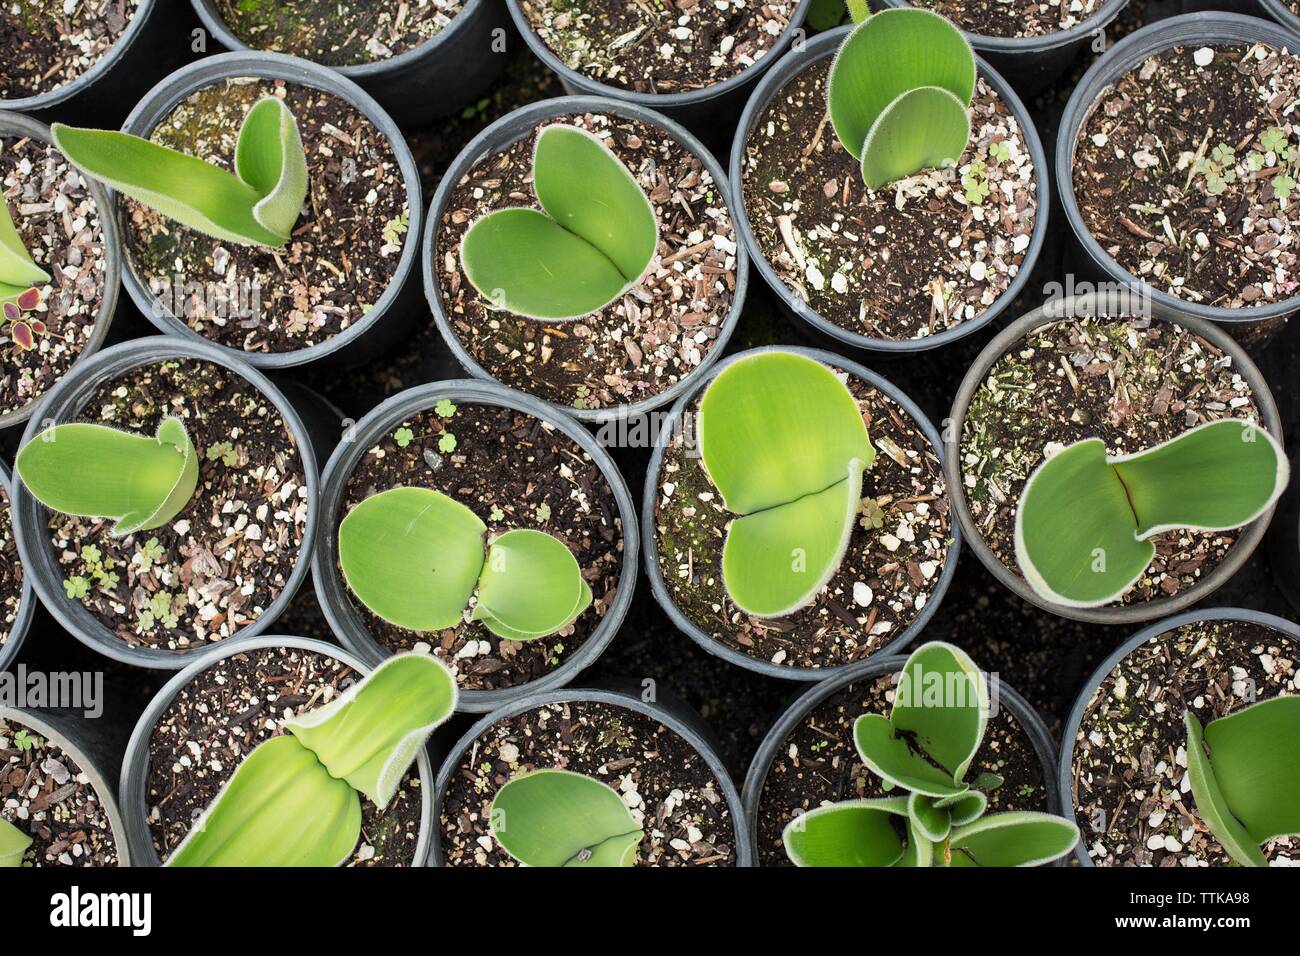 Haemanthus humilis potted plants as seen from overhead. Stock Photo